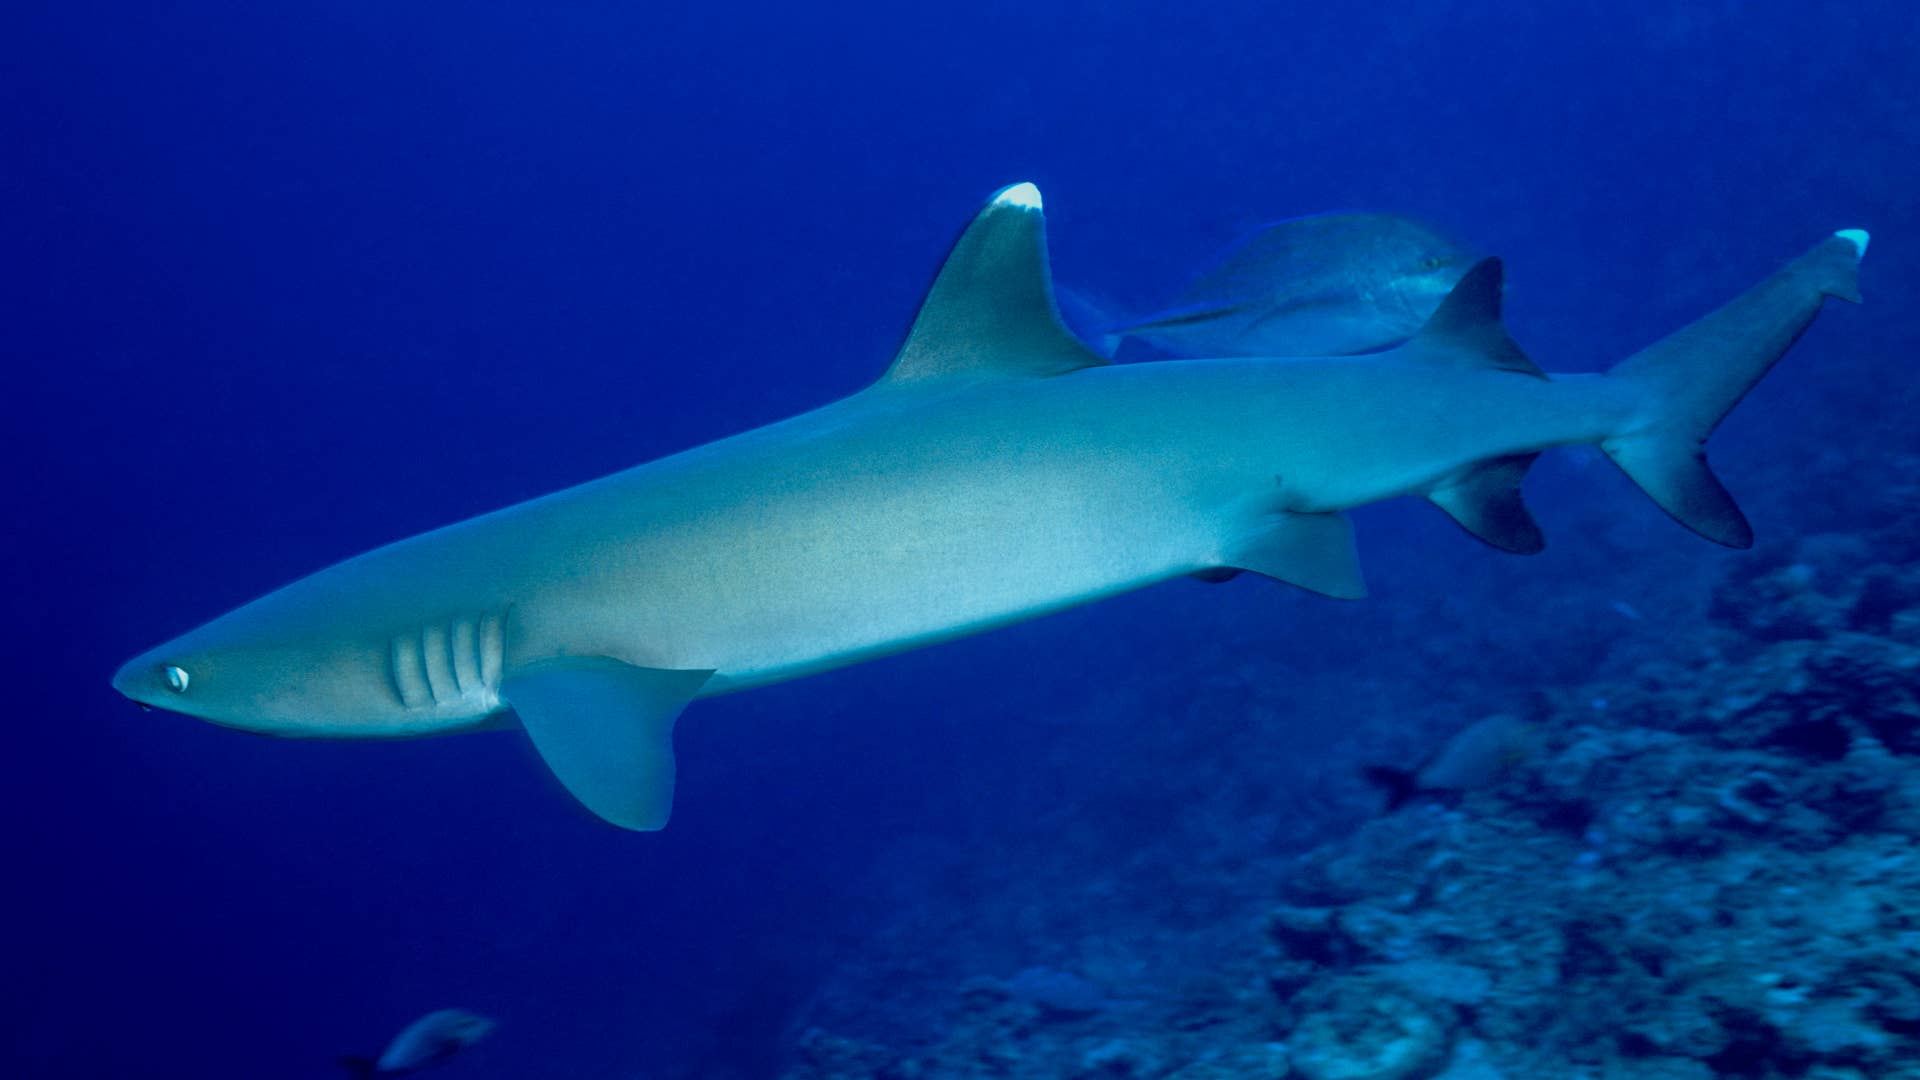 White tip reef shark, Triaenodon obesus, at Shark Reef edge, small usually not exceeding 1.6 m in length and easily recognizable by its slender body, short but broad head and its white-tipped dorsal and caudal fins.